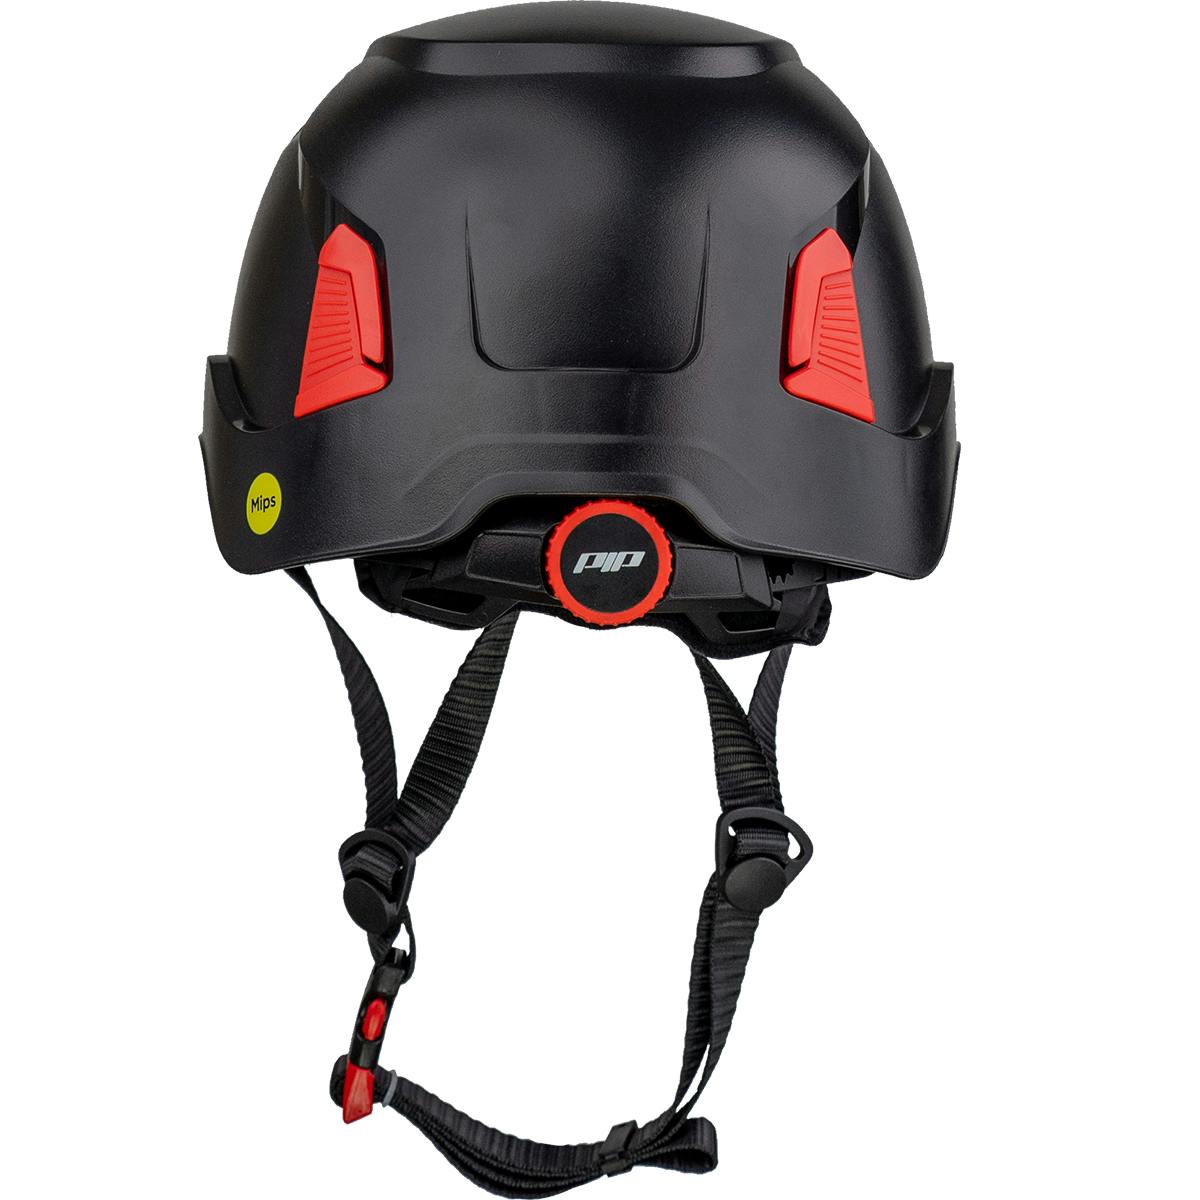 Traverse™ Industrial Climbing Helmet with Mips® Technology, ABS Shell, EPS Foam Impact Liner, HDPE Suspension, Wheel Ratchet Adjustment and 4-Point Chin Strap (280-HP1491RM)_0